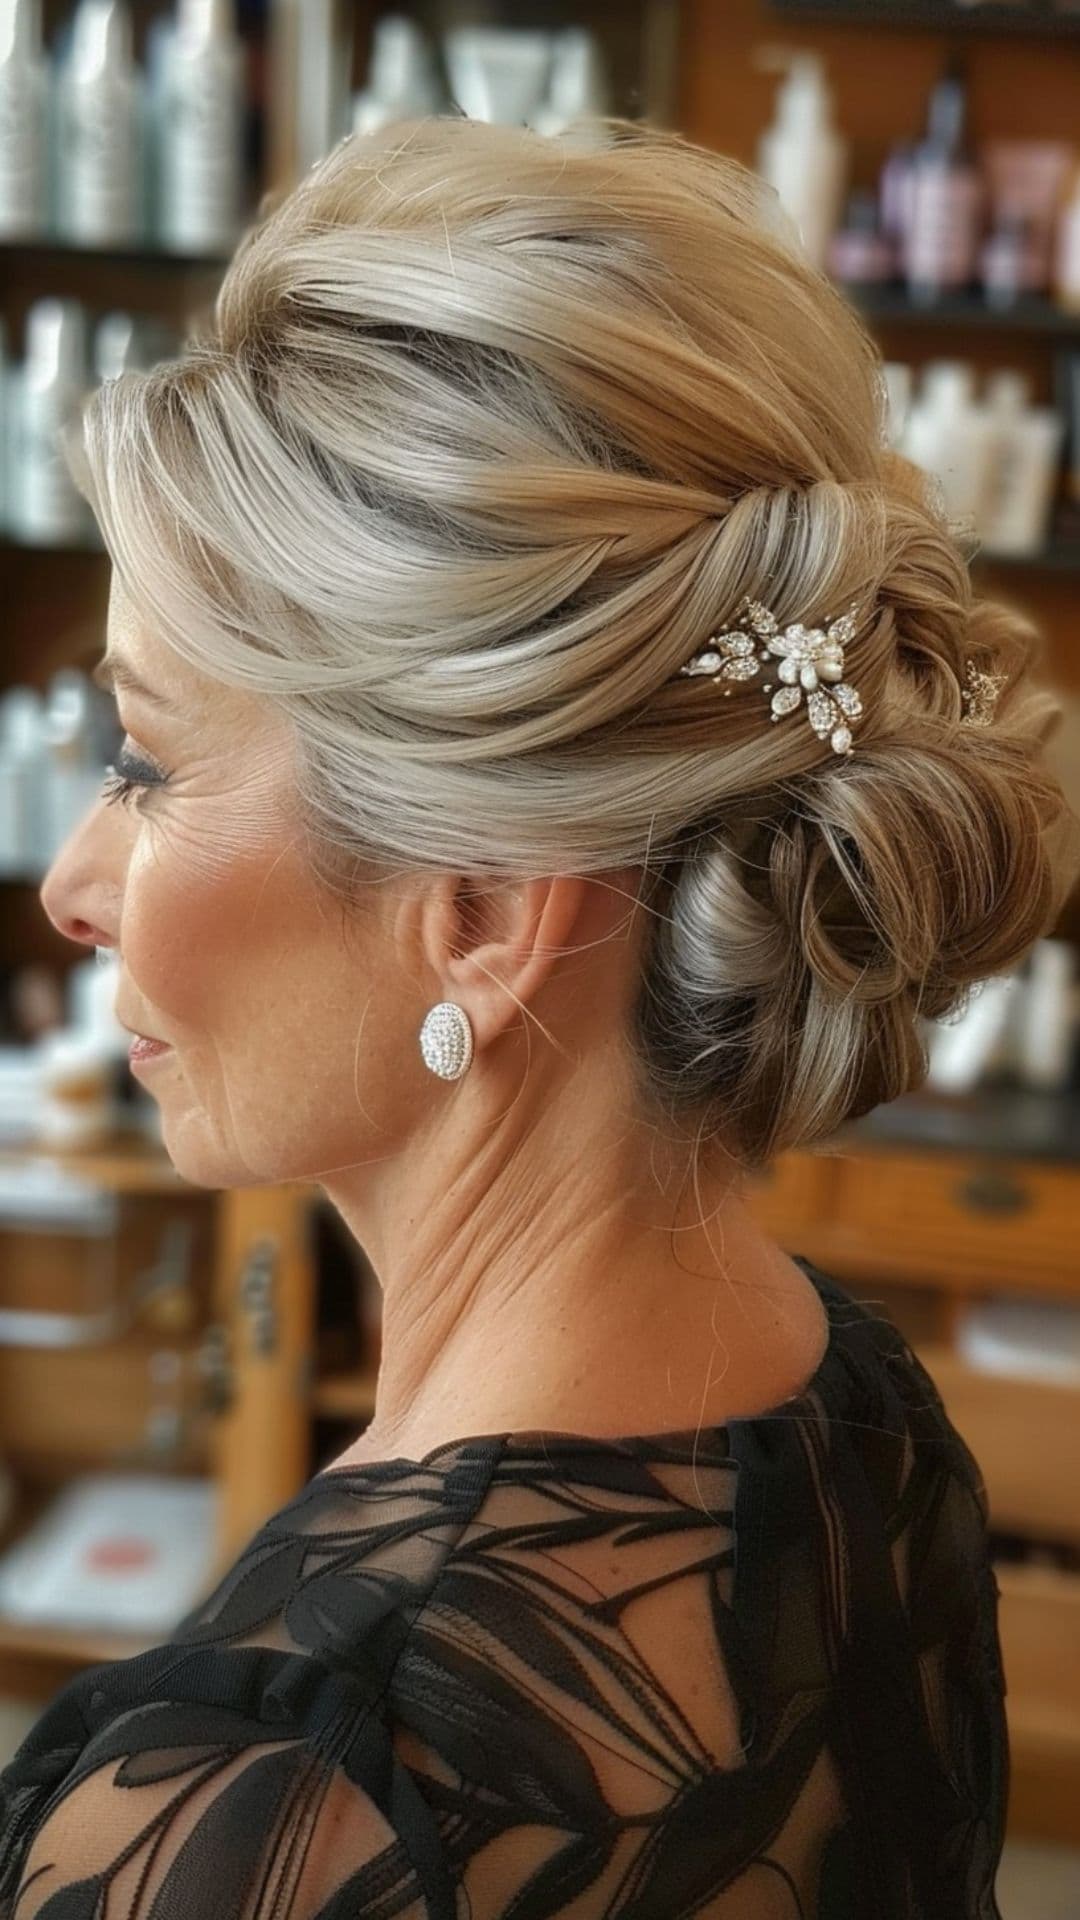 An old woman modelling a chignon hairstyle.